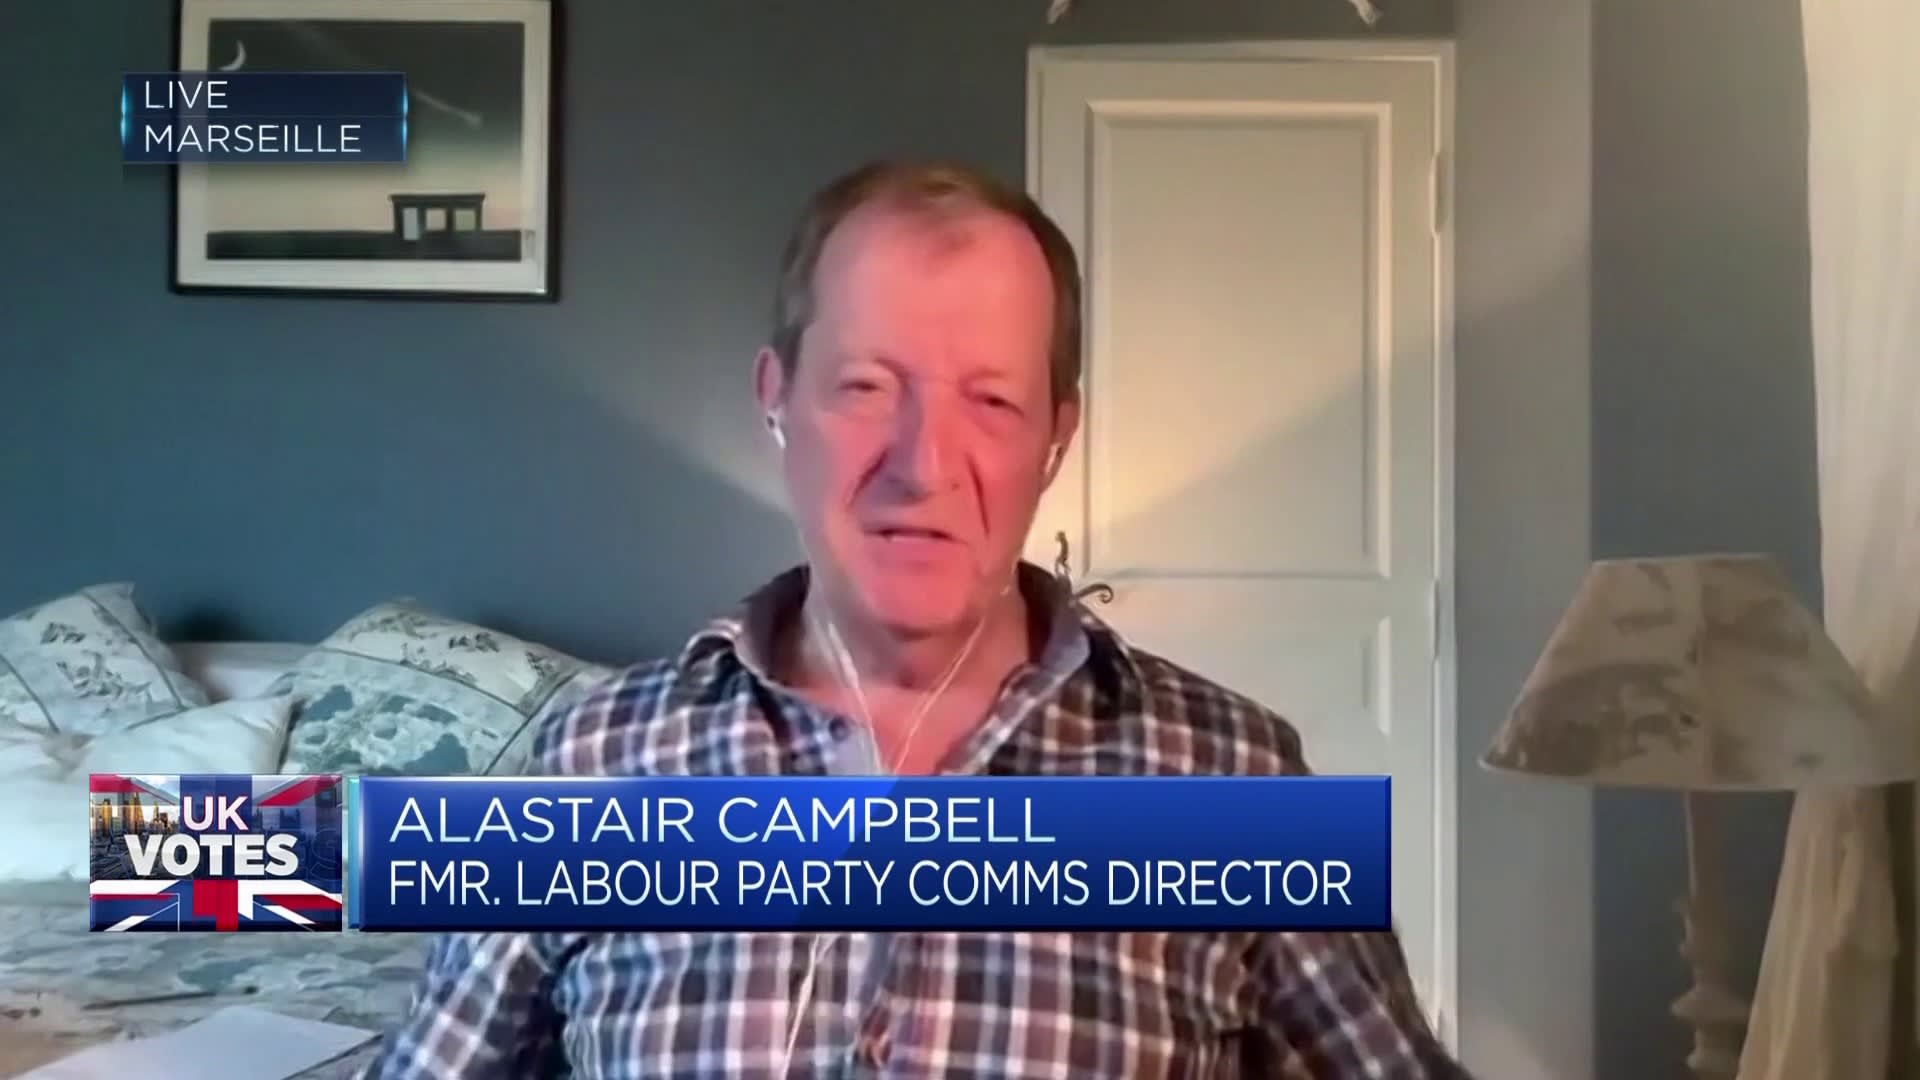 'Something's going very wrong': Alastair Campbell casts doubt on UK opinion polls